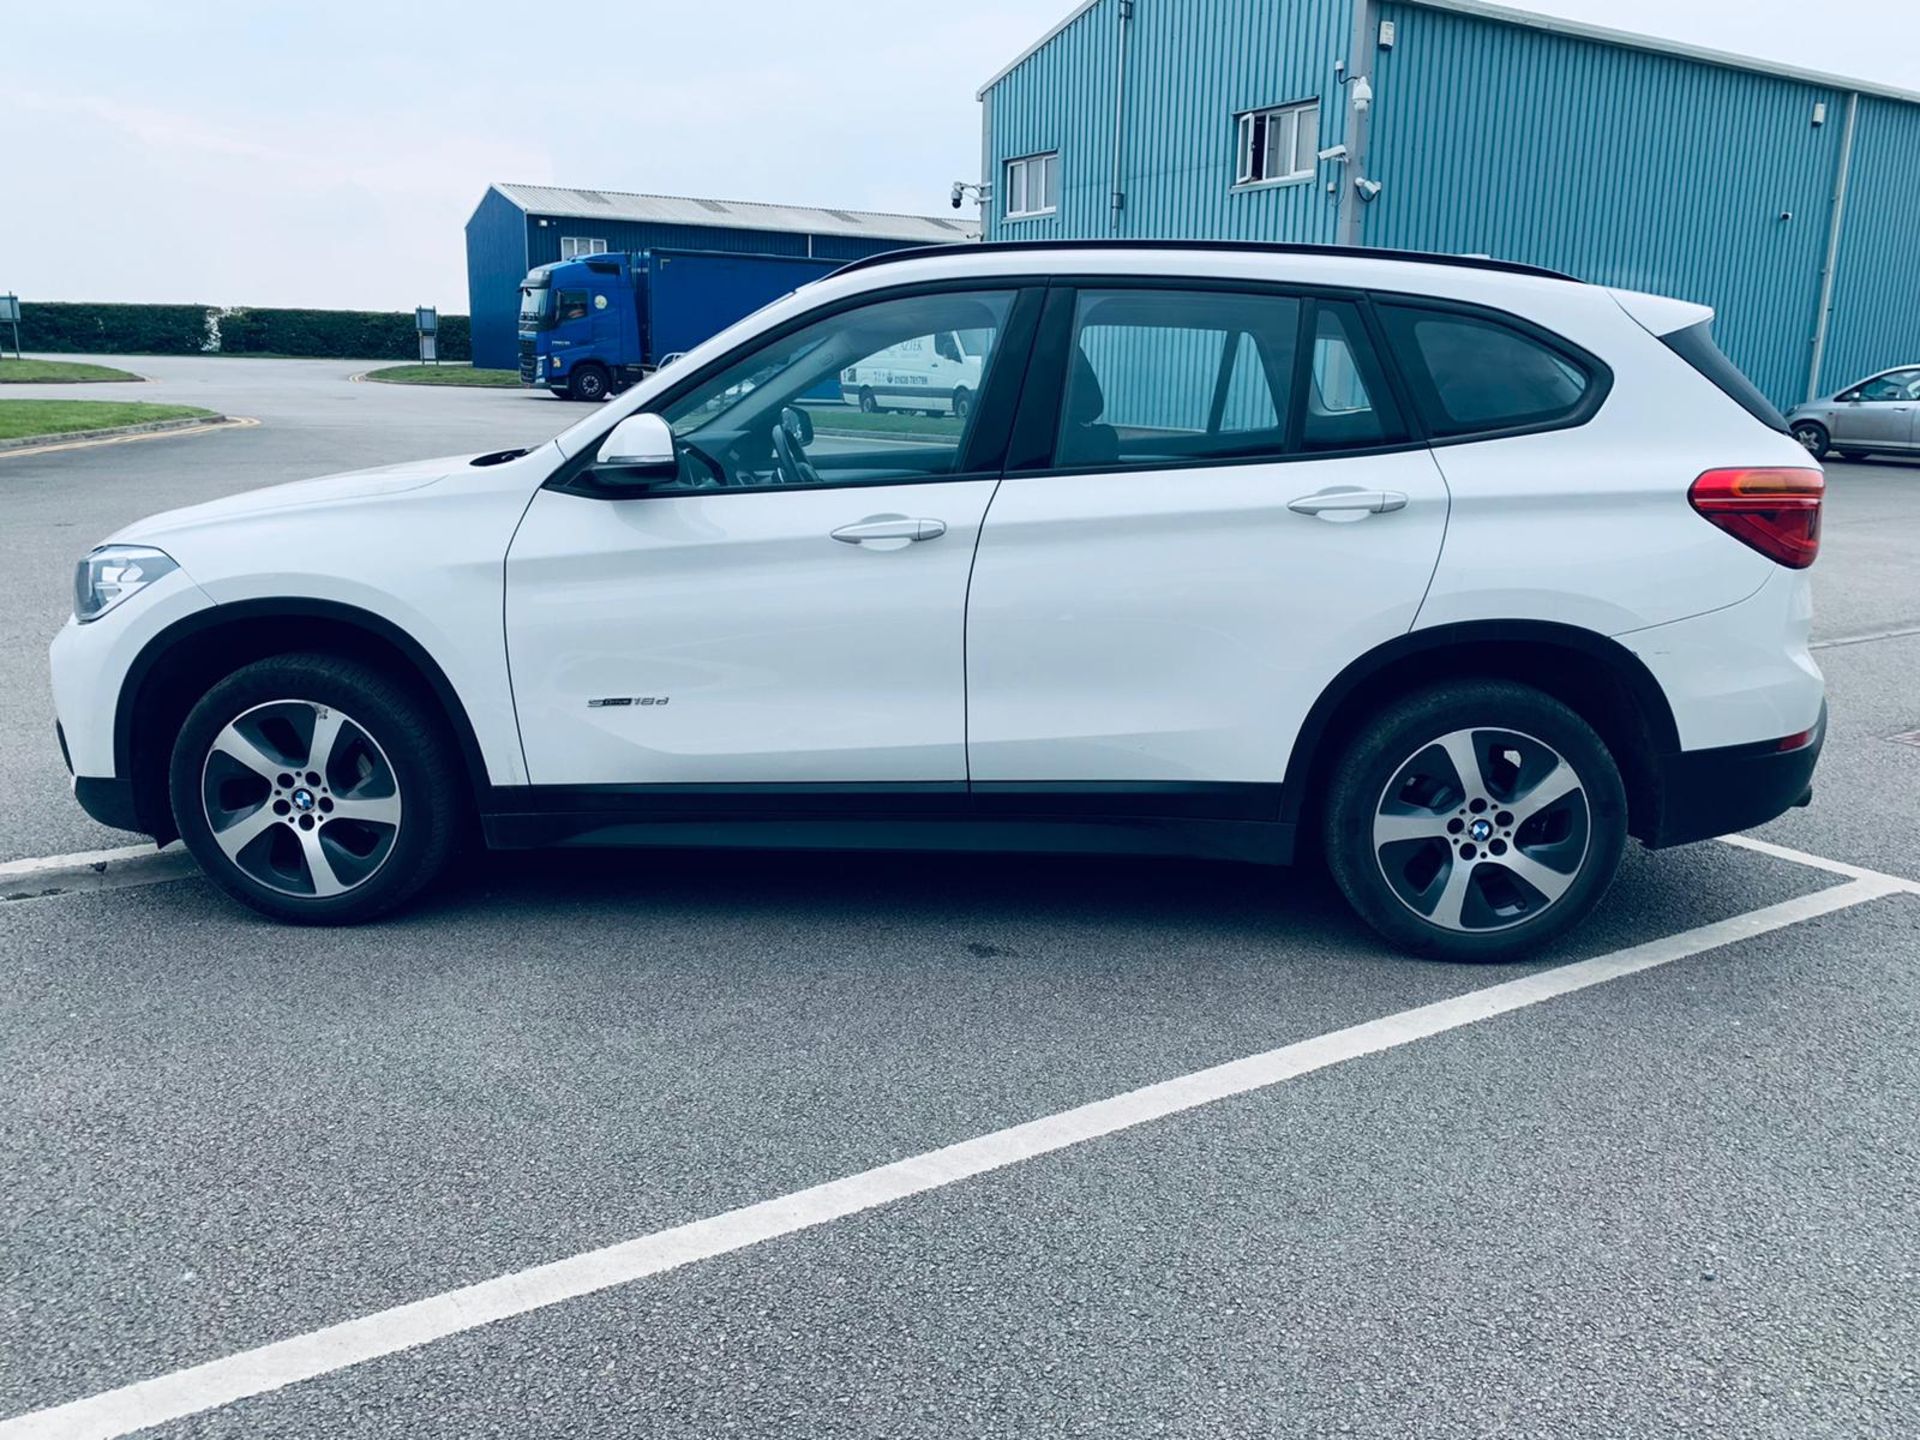 BMW X1 sDrive 2.0d Special Equipment Auto - 2018 Reg - Service History - 1 Owner From New - Image 4 of 25